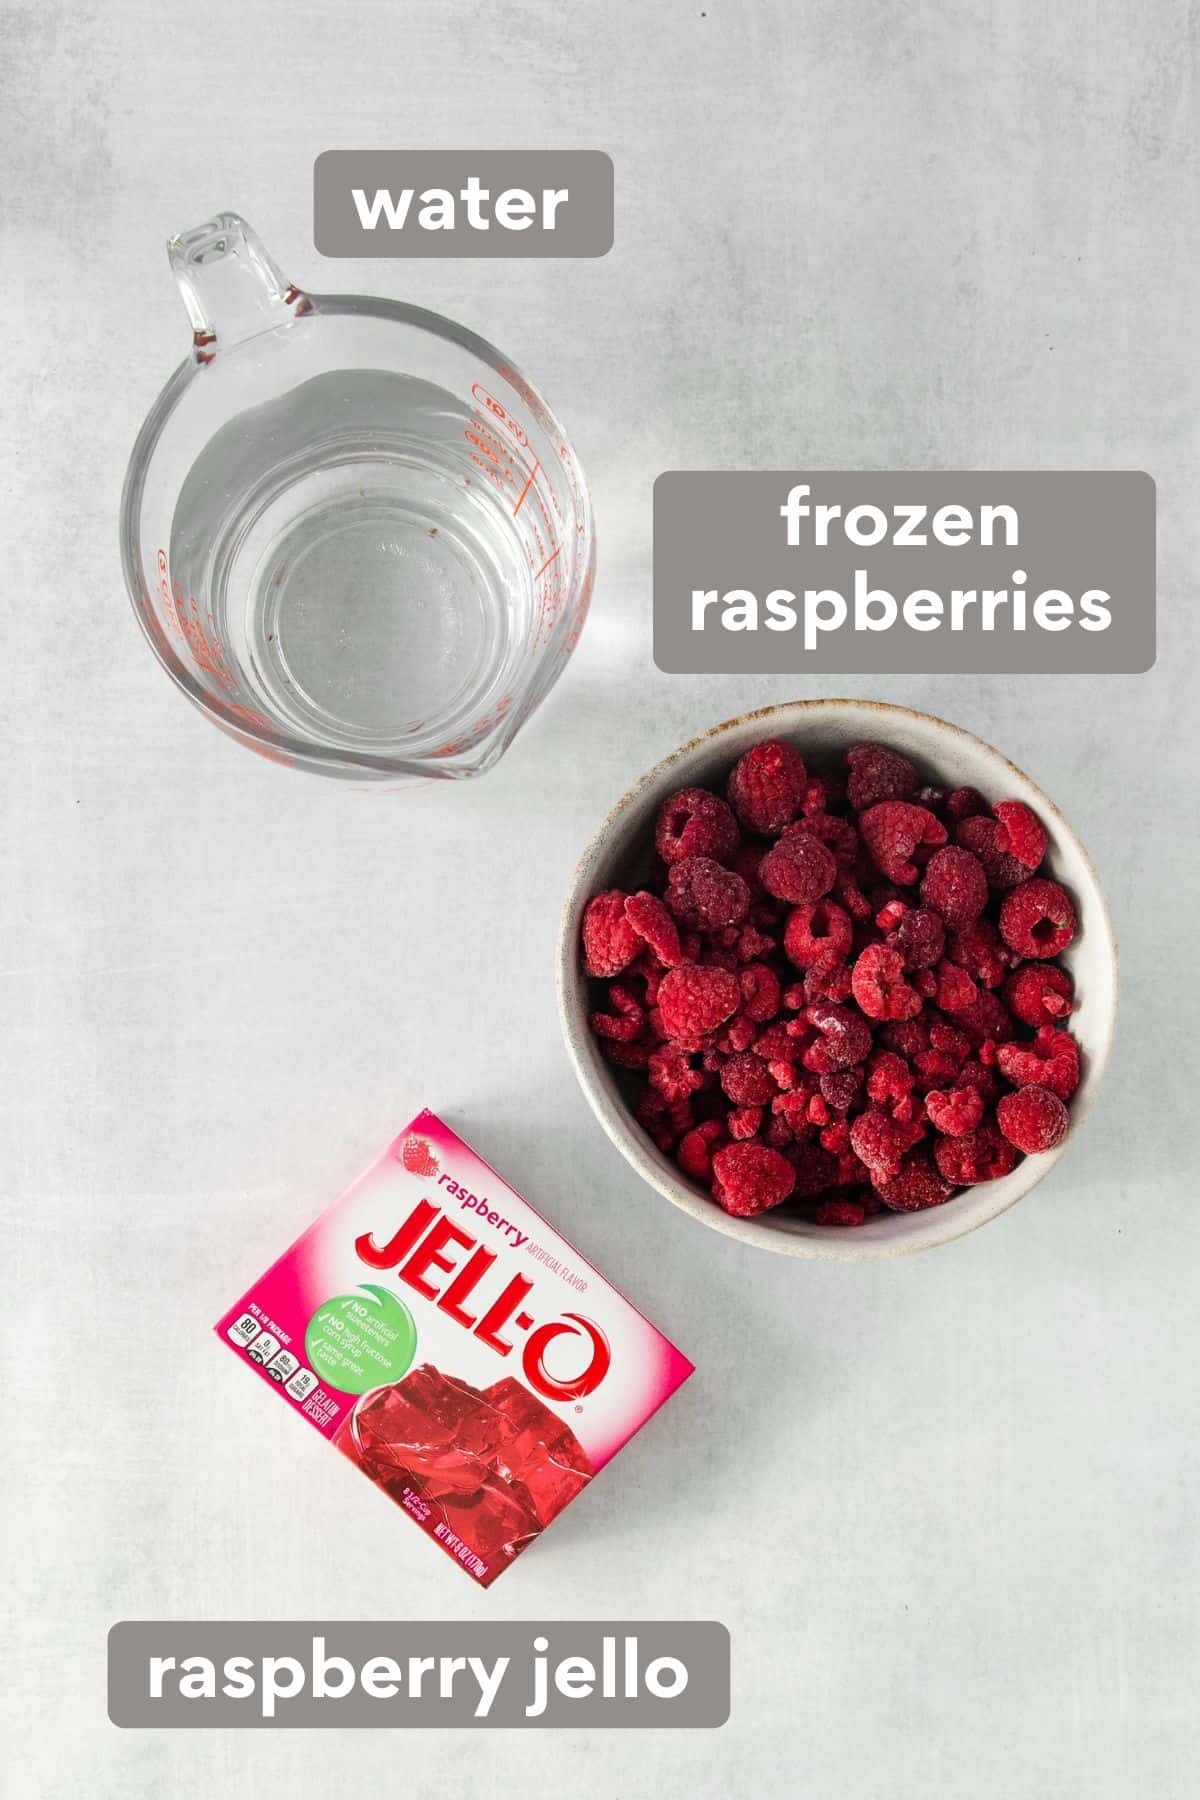 Raspberry jello filling ingredients on a countertop